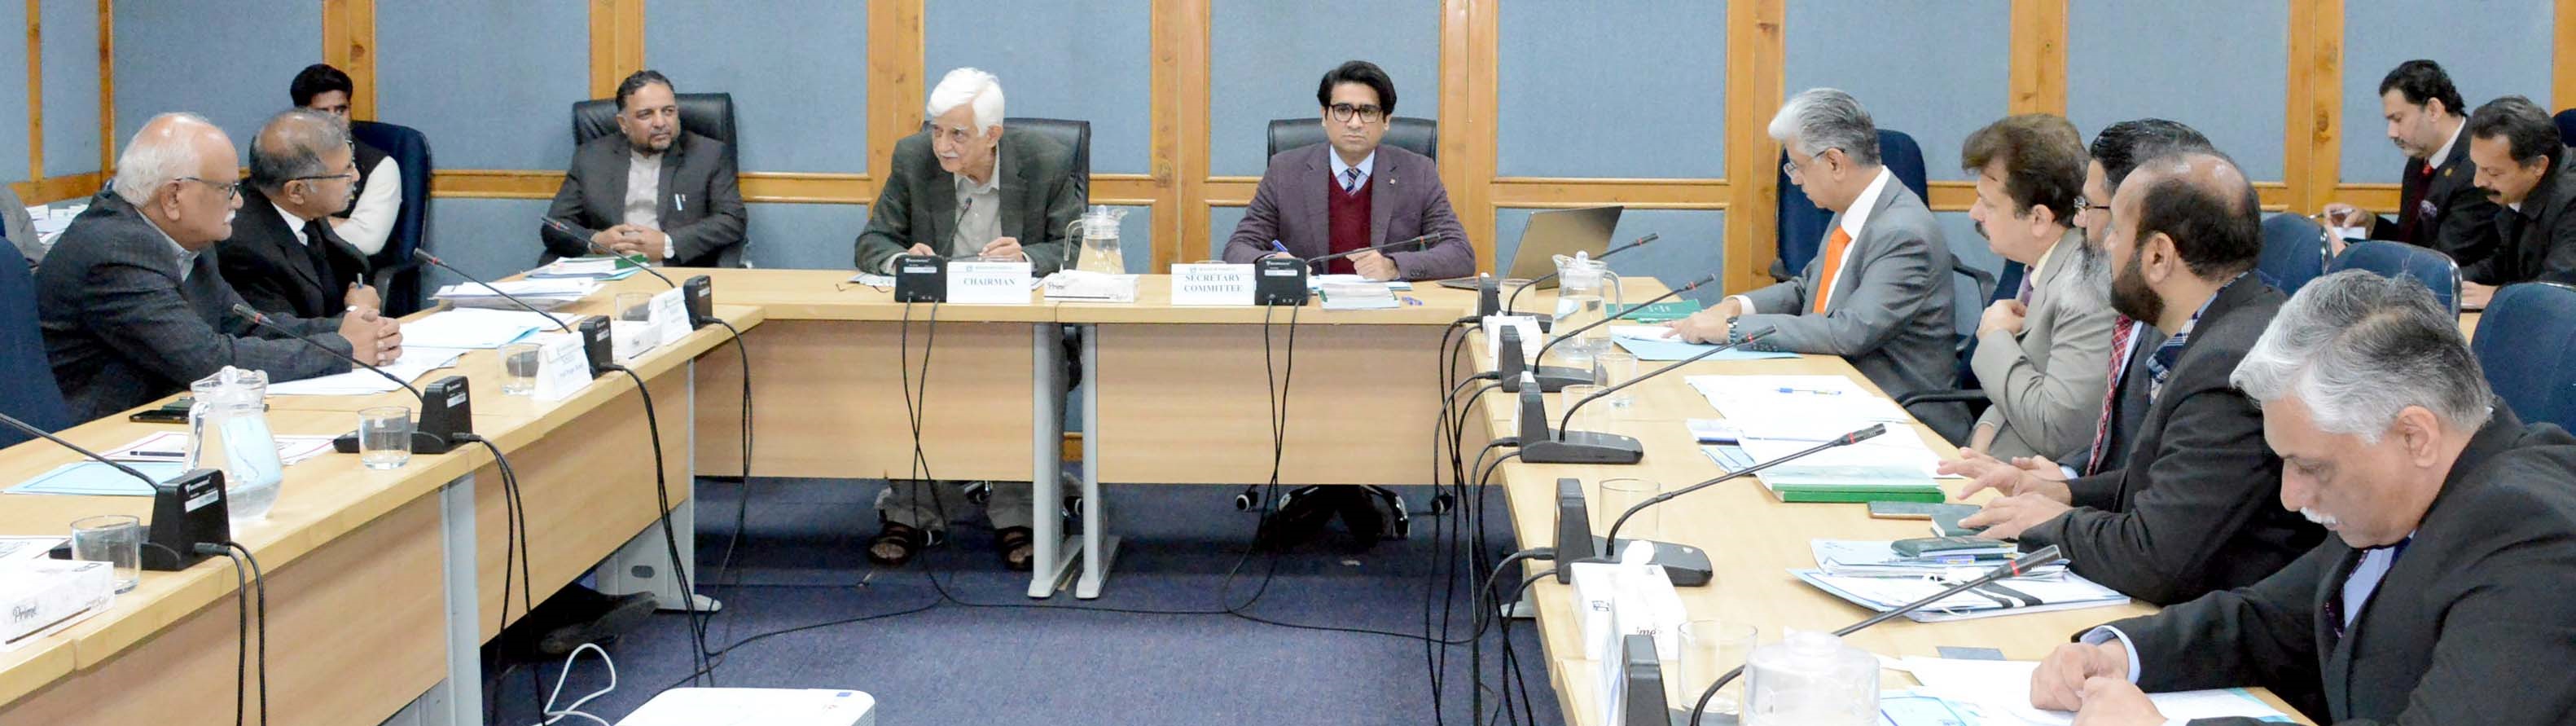 Senator Taj Haider, Chairman Senate Standing Committee on Parliamentary Affairs Presiding over a Meeting of the Committee at Parliament Lodges, Islamabad 